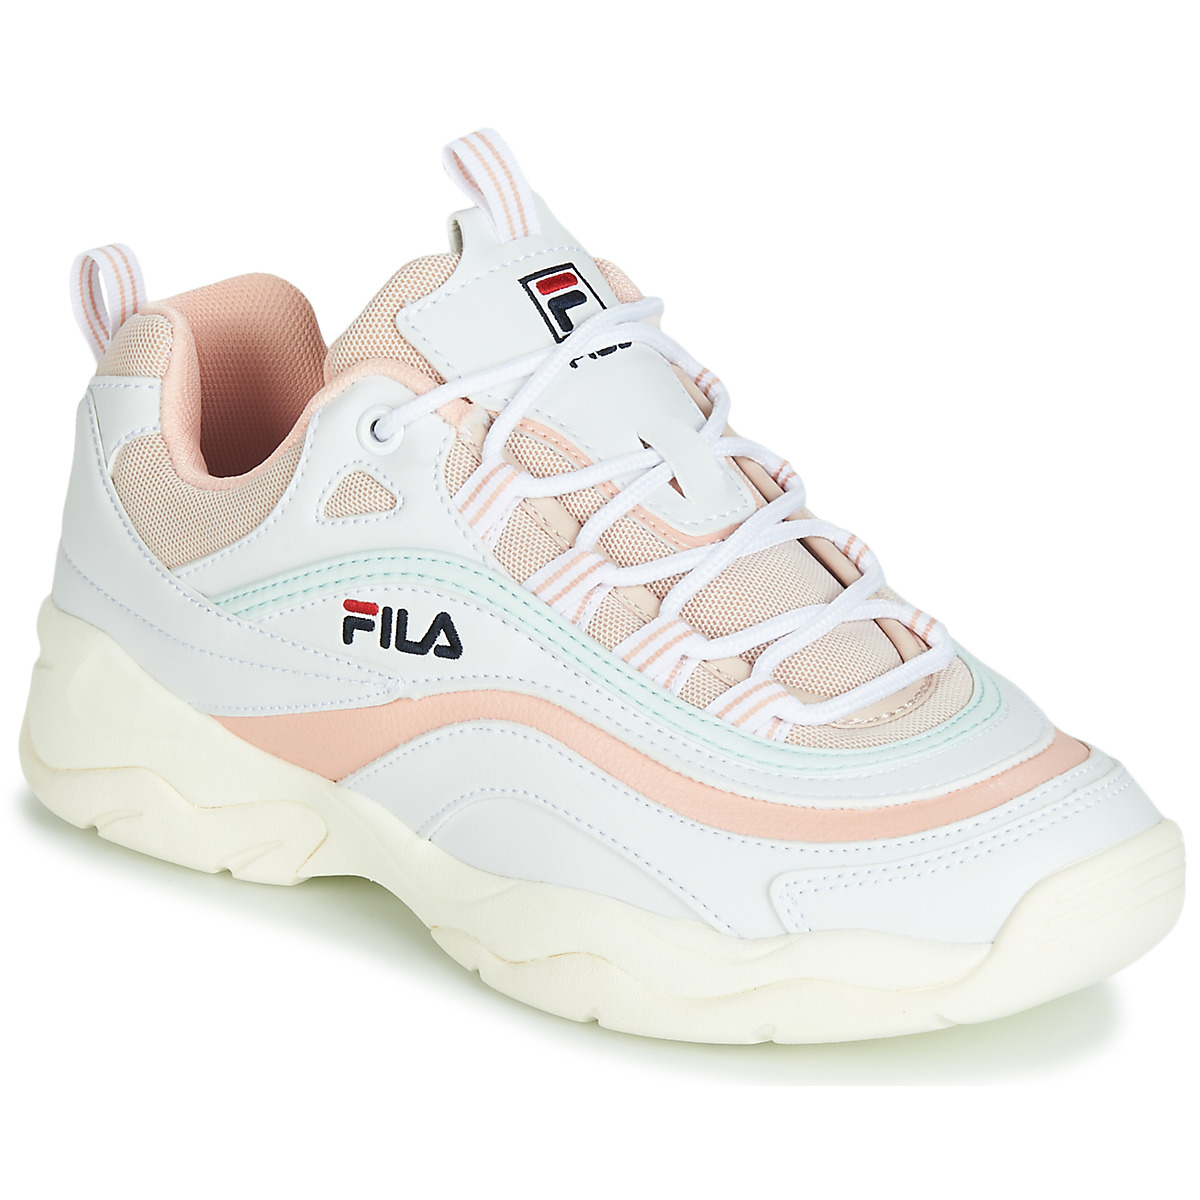 Fila RAY LOW WMN Blanc / Beige - Chaussures Baskets basses Femme 77,98 €